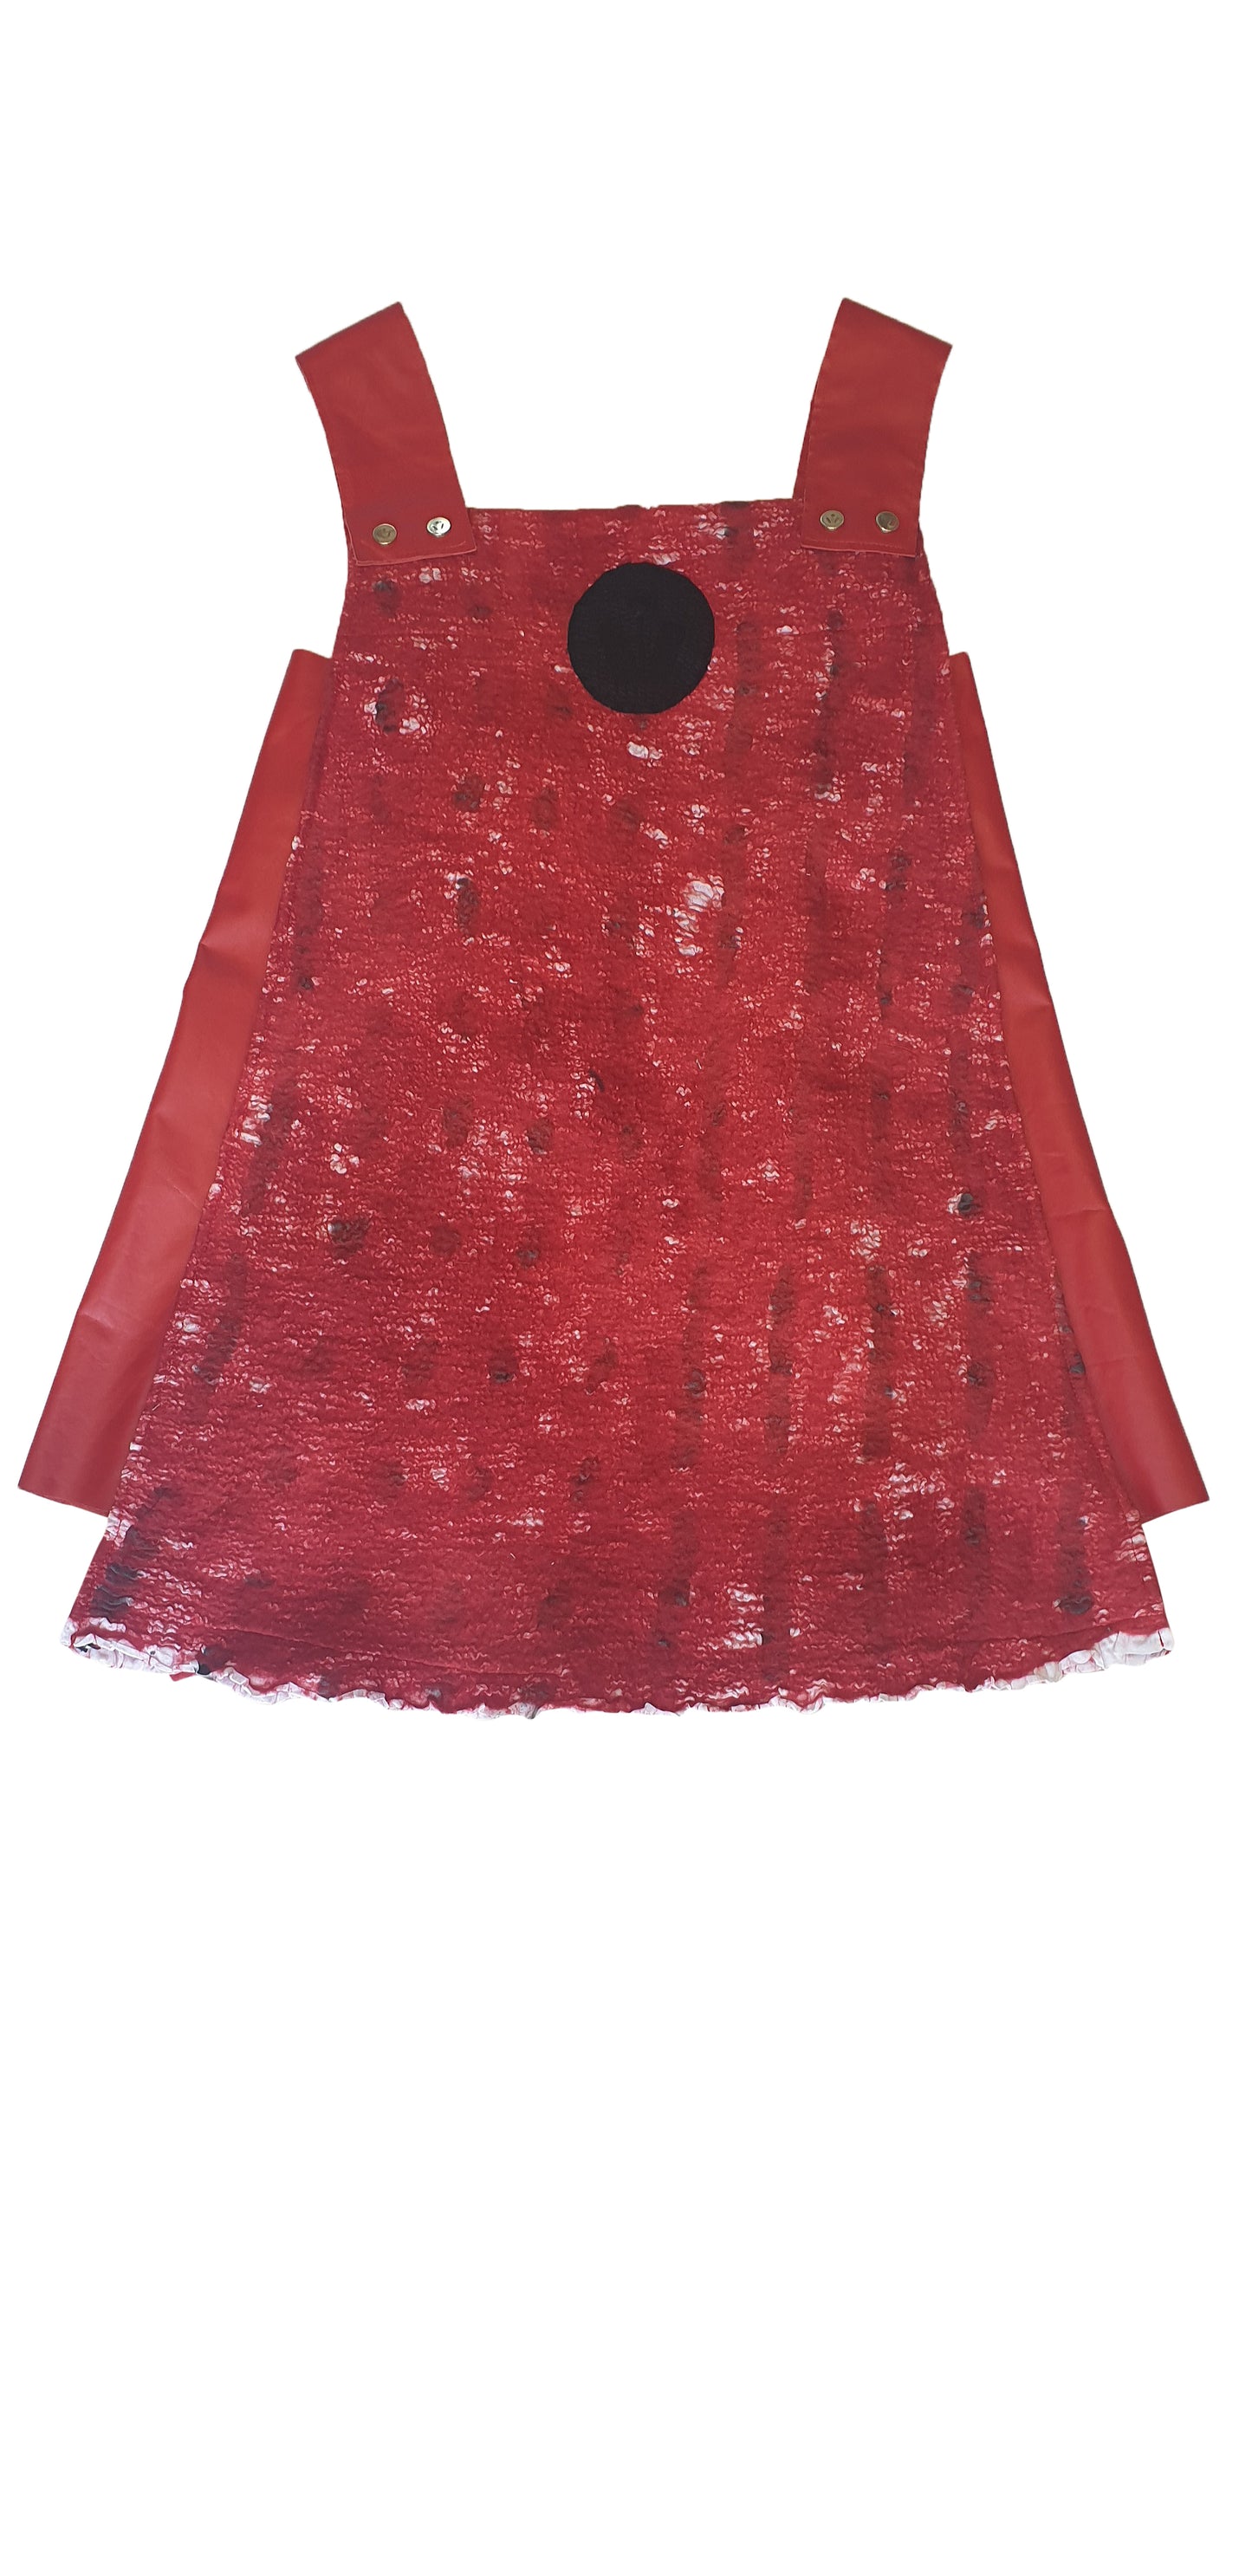 Artisanal Felted Red Wool Apron Dress